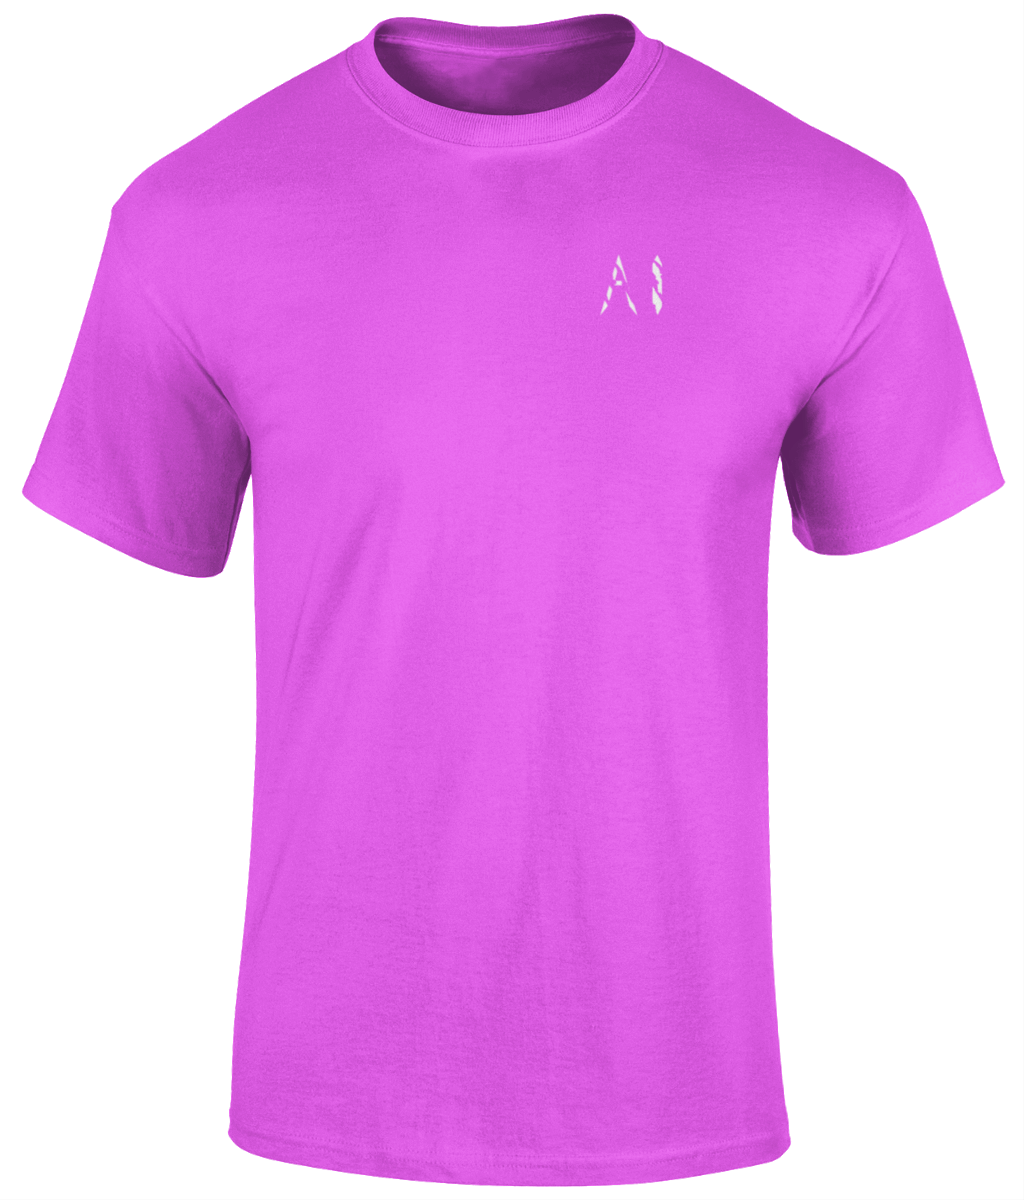 Mens purple Heavy Cotton T-Shirt with white AI logo on the left chest